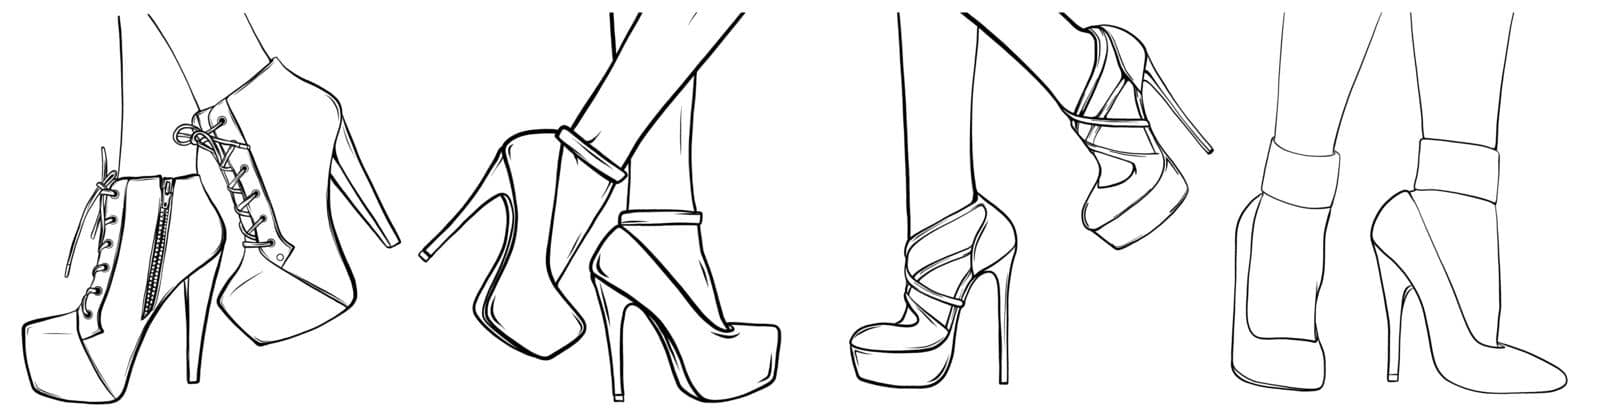 fashion high heels shoes. vector art illustration. by dean